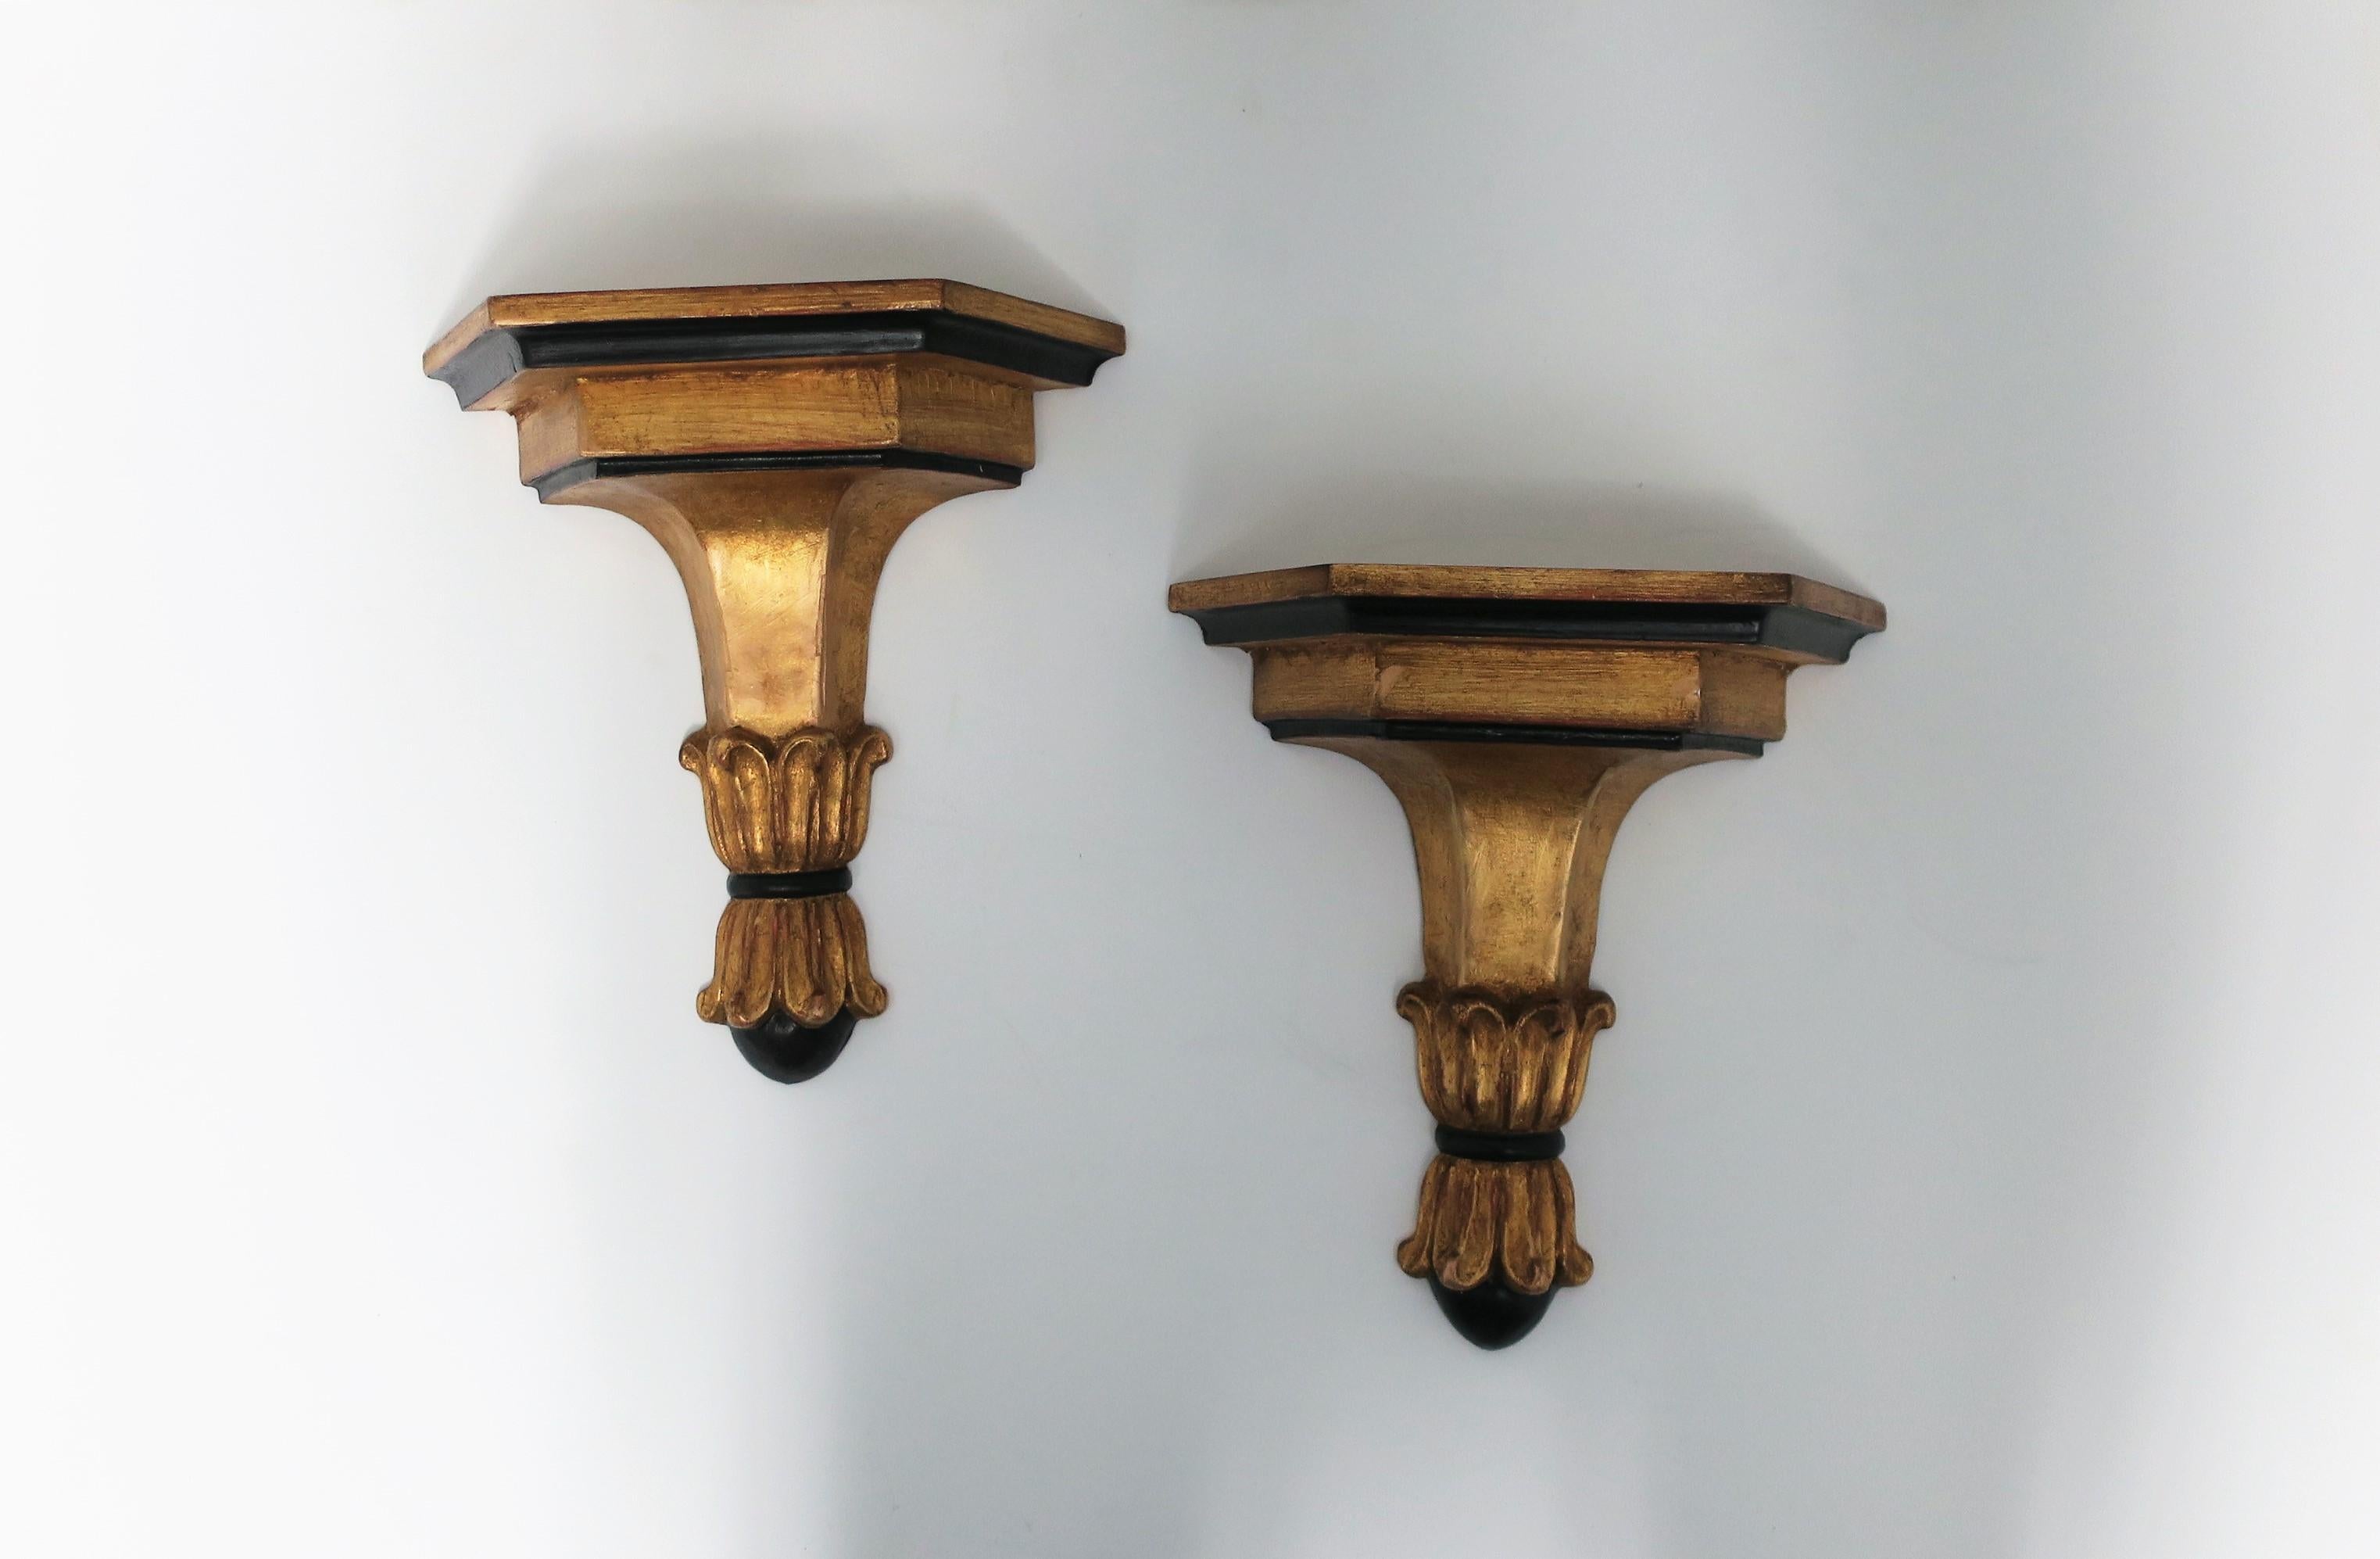 Neoclassical Revival Italian Gold Giltwood and Black Wall Shelves Brackets, Pair